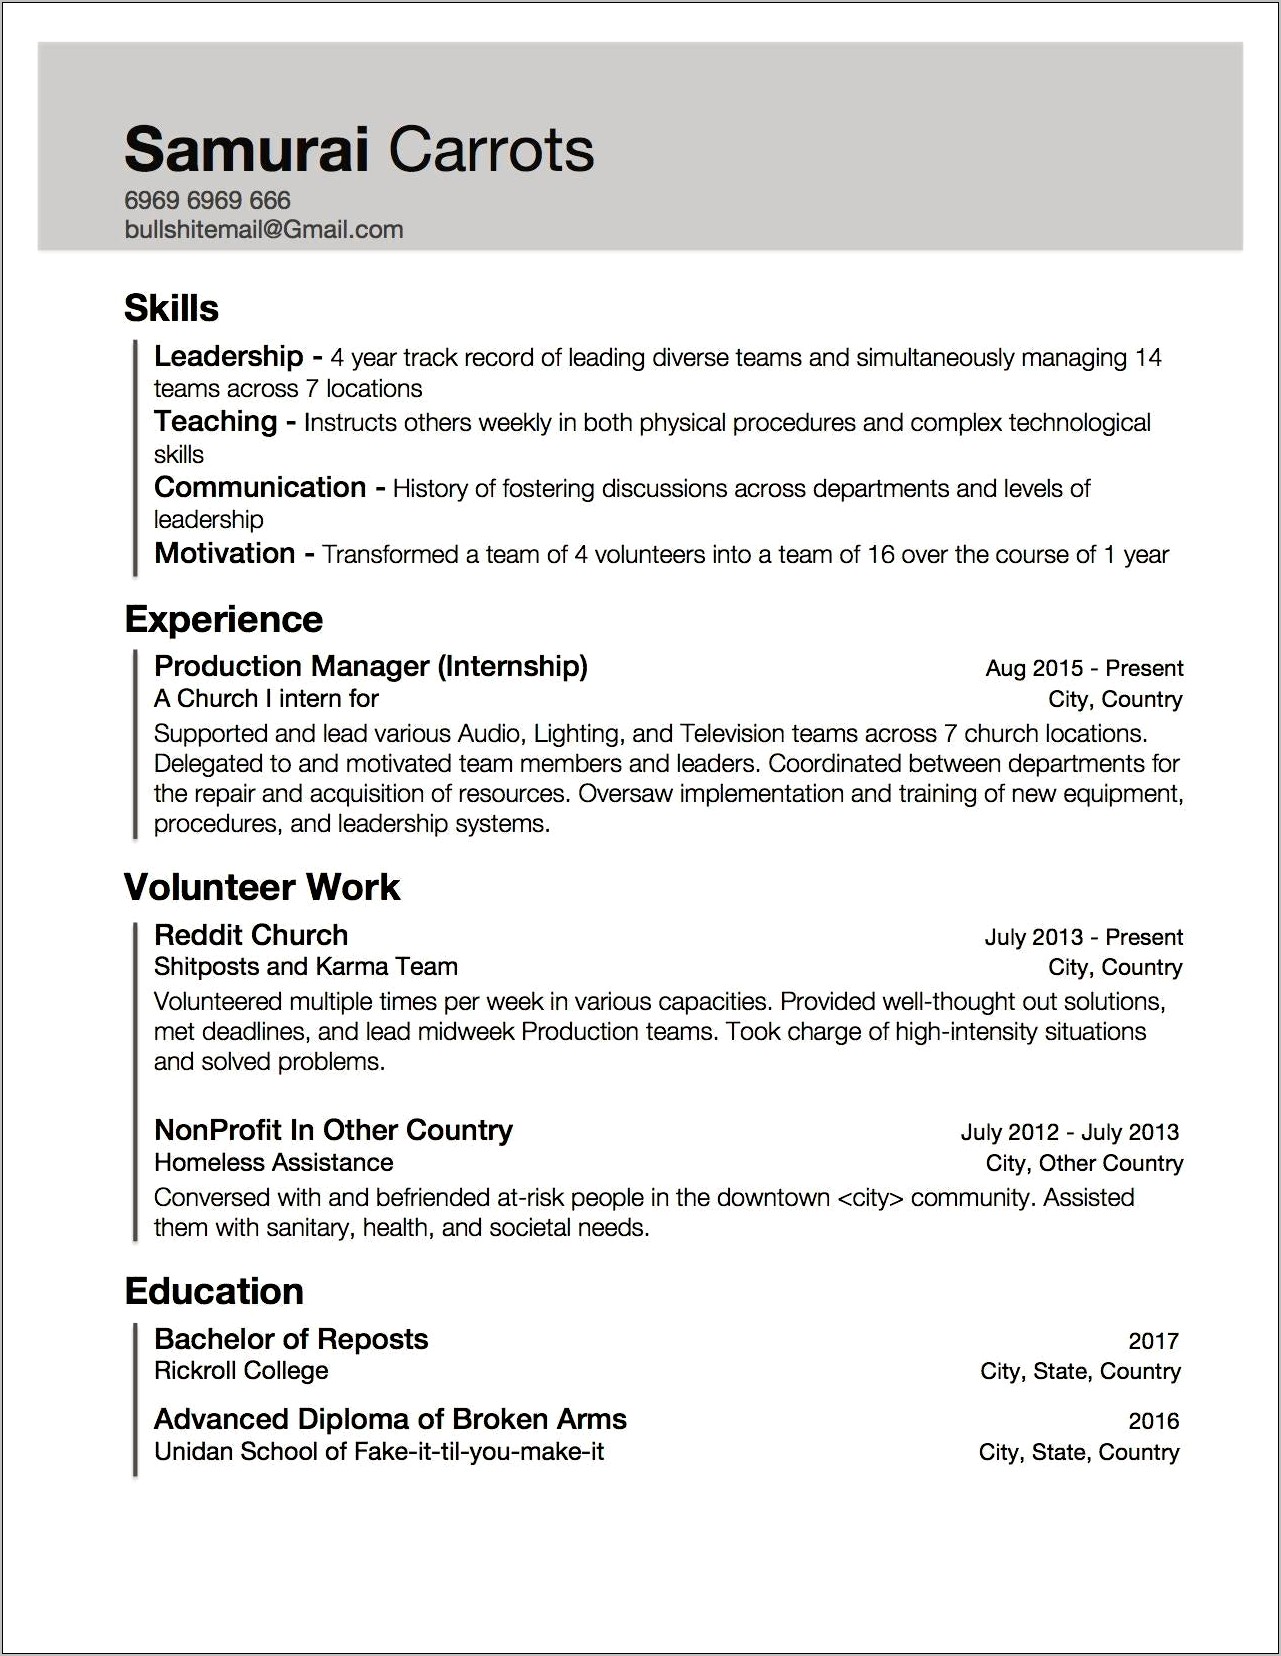 Experience Vs Professional Experience On Resume